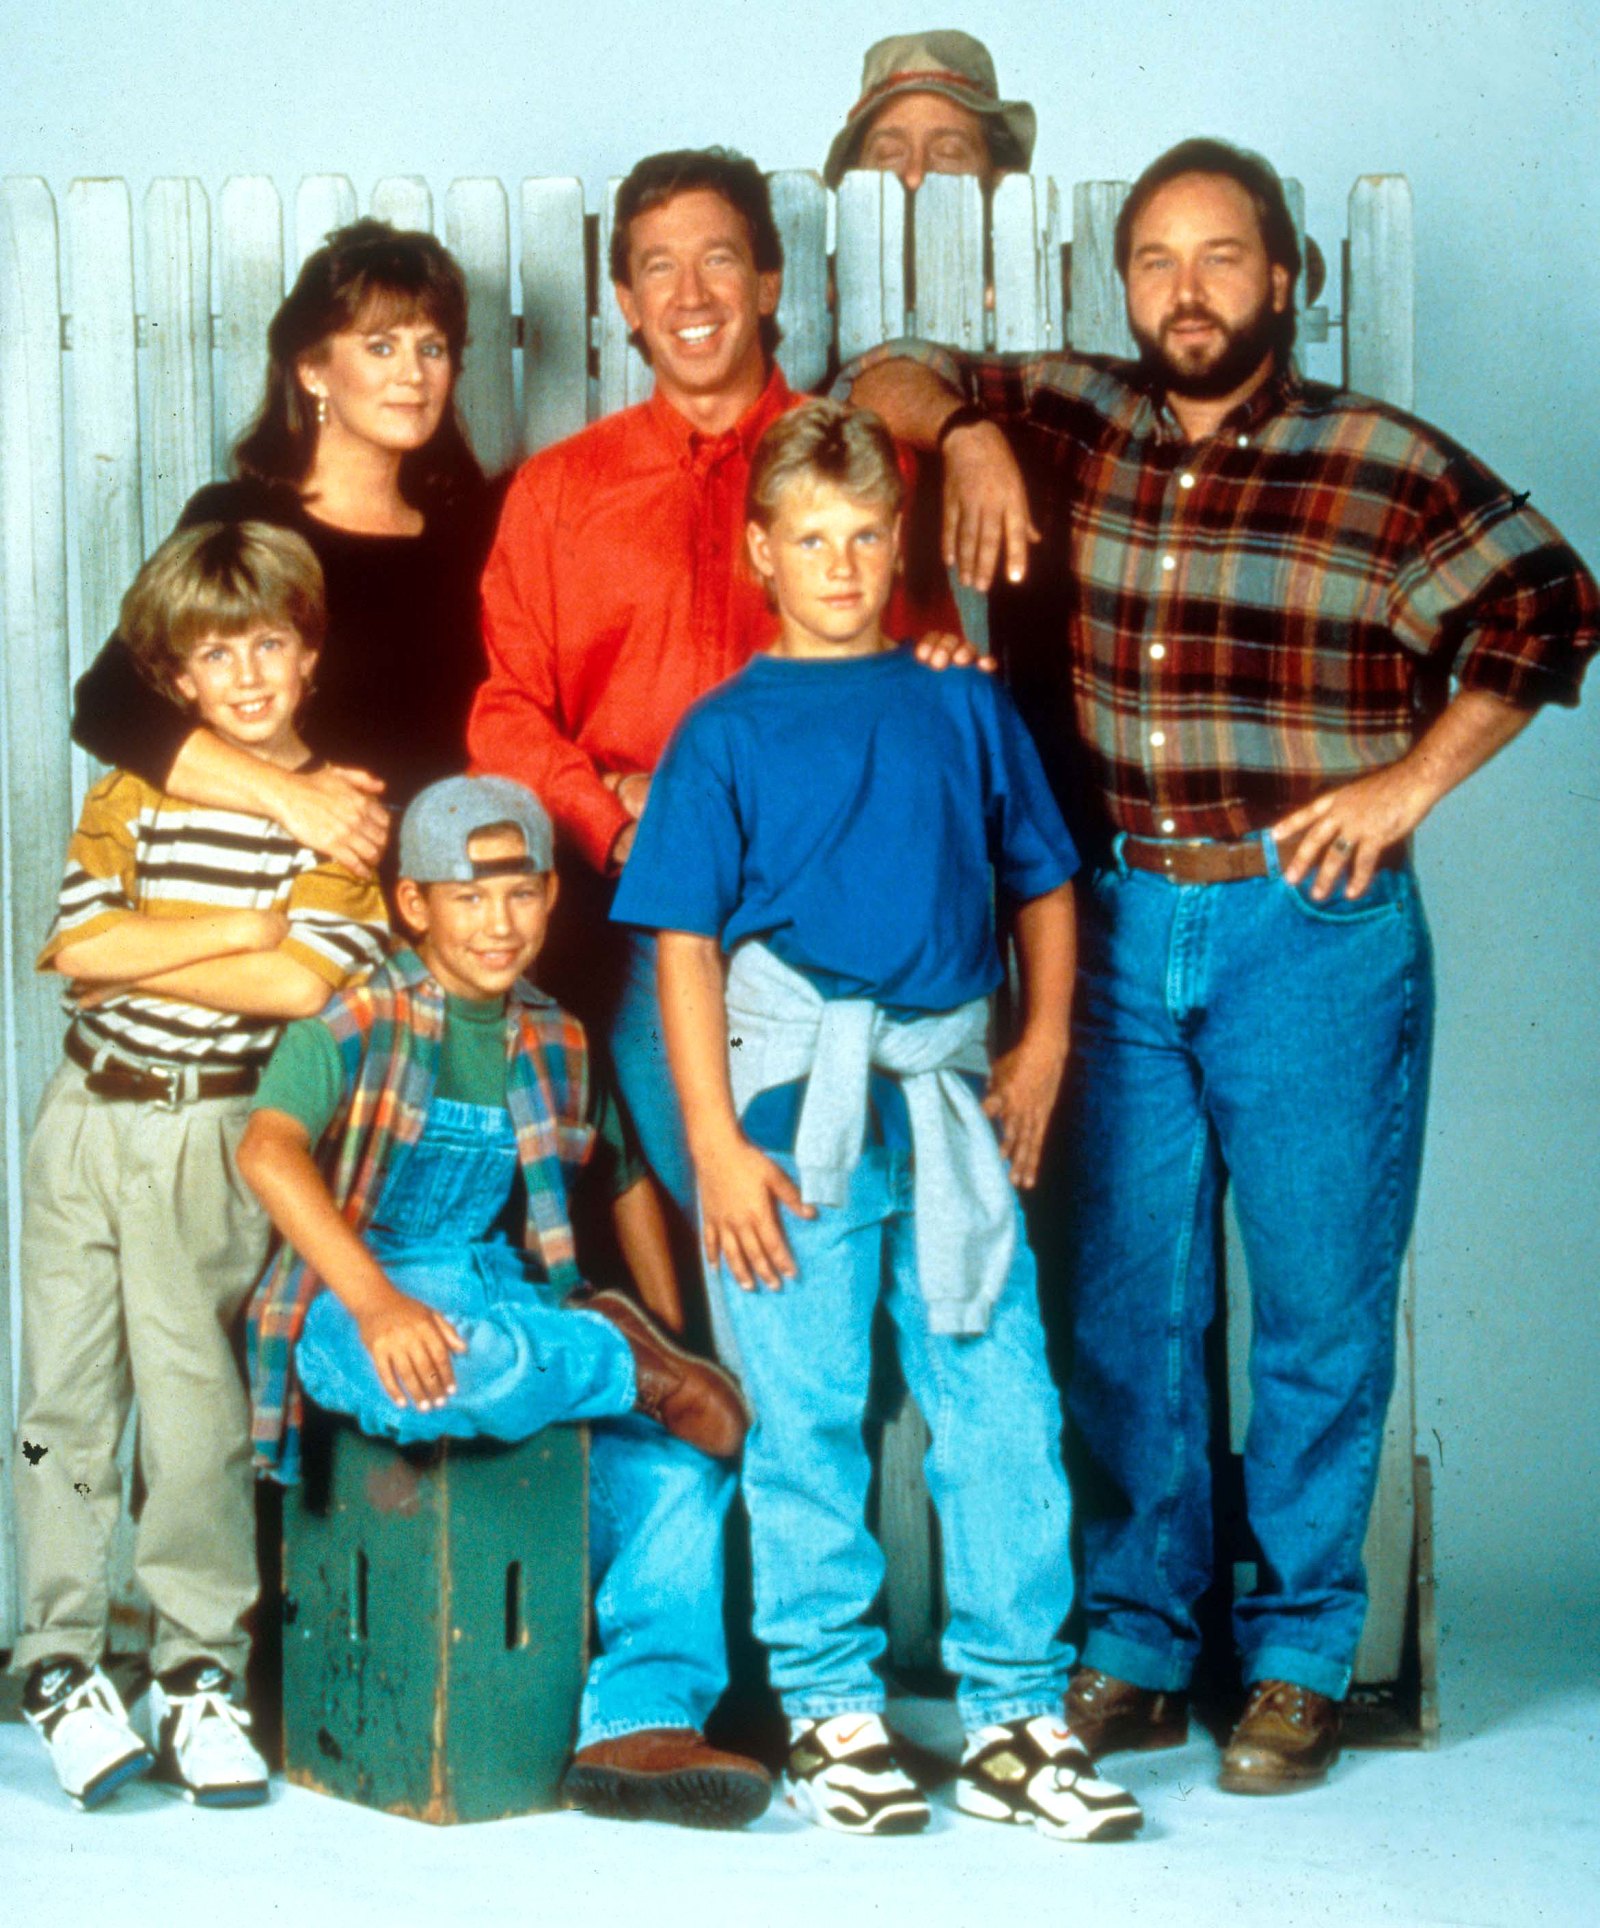 Home-Improvement-Cast-Where-Are-They-Now.jpg